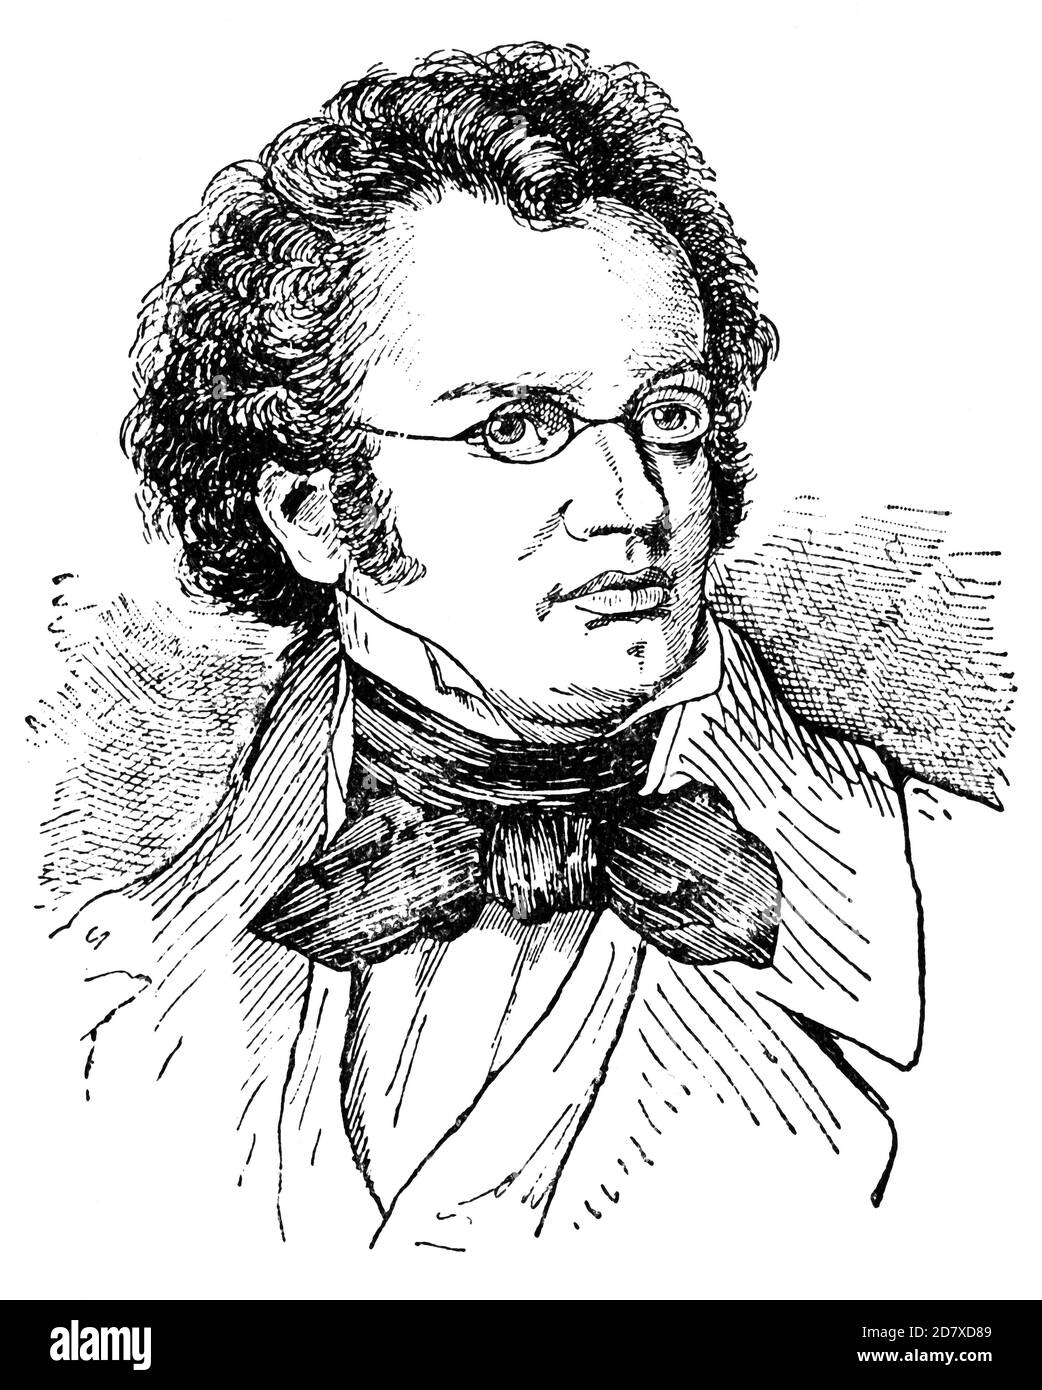 Portrait of Franz Peter Schubert - an Austrian composer of the late Classical and early Romantic eras. Illustration of the 19th century. White background. Stock Photo